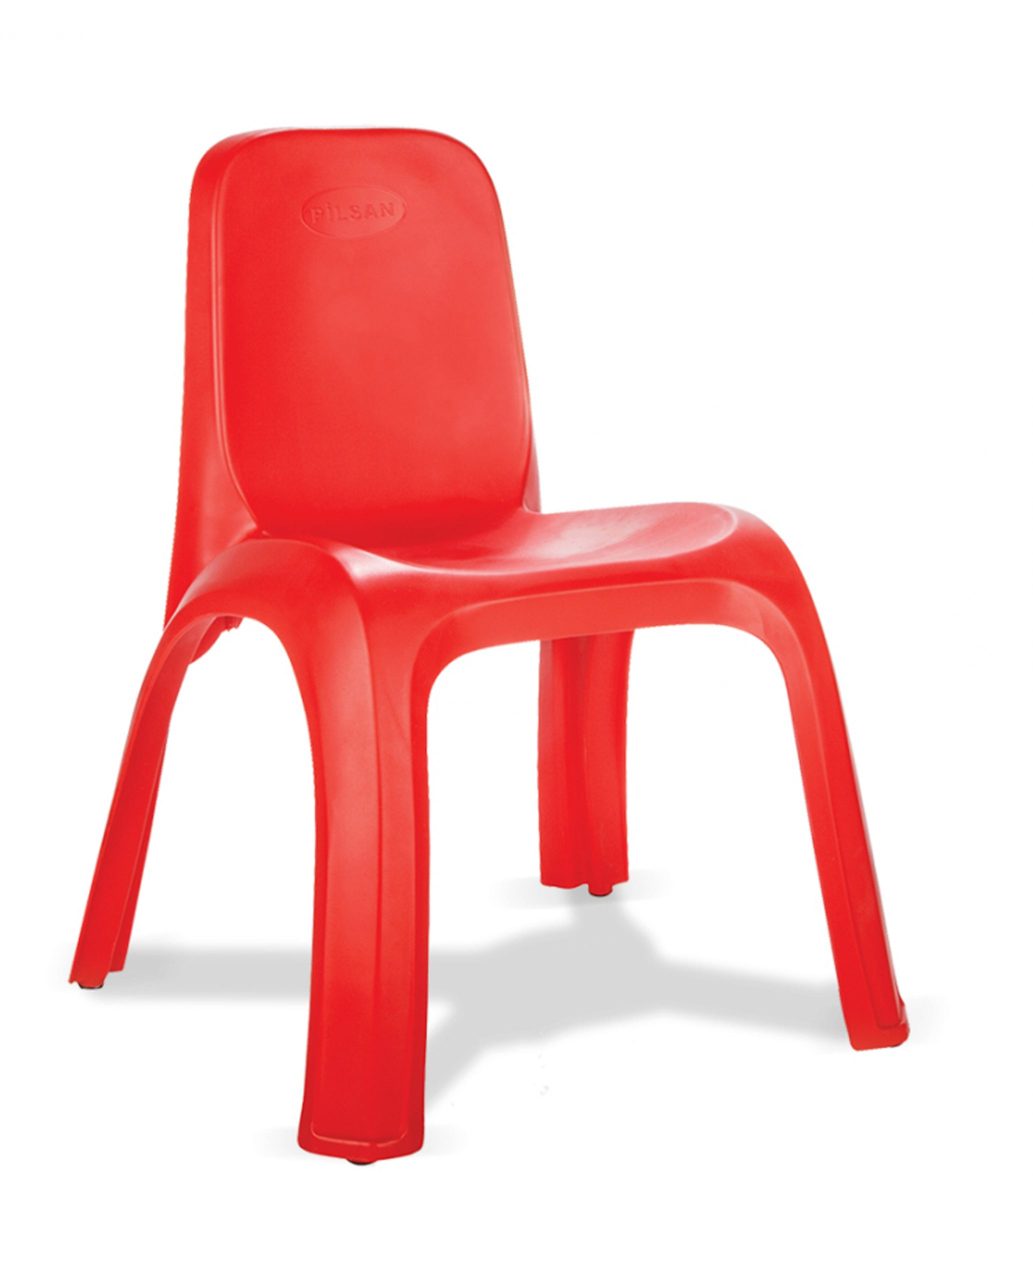 03-417-King-Chair-Red-scaled